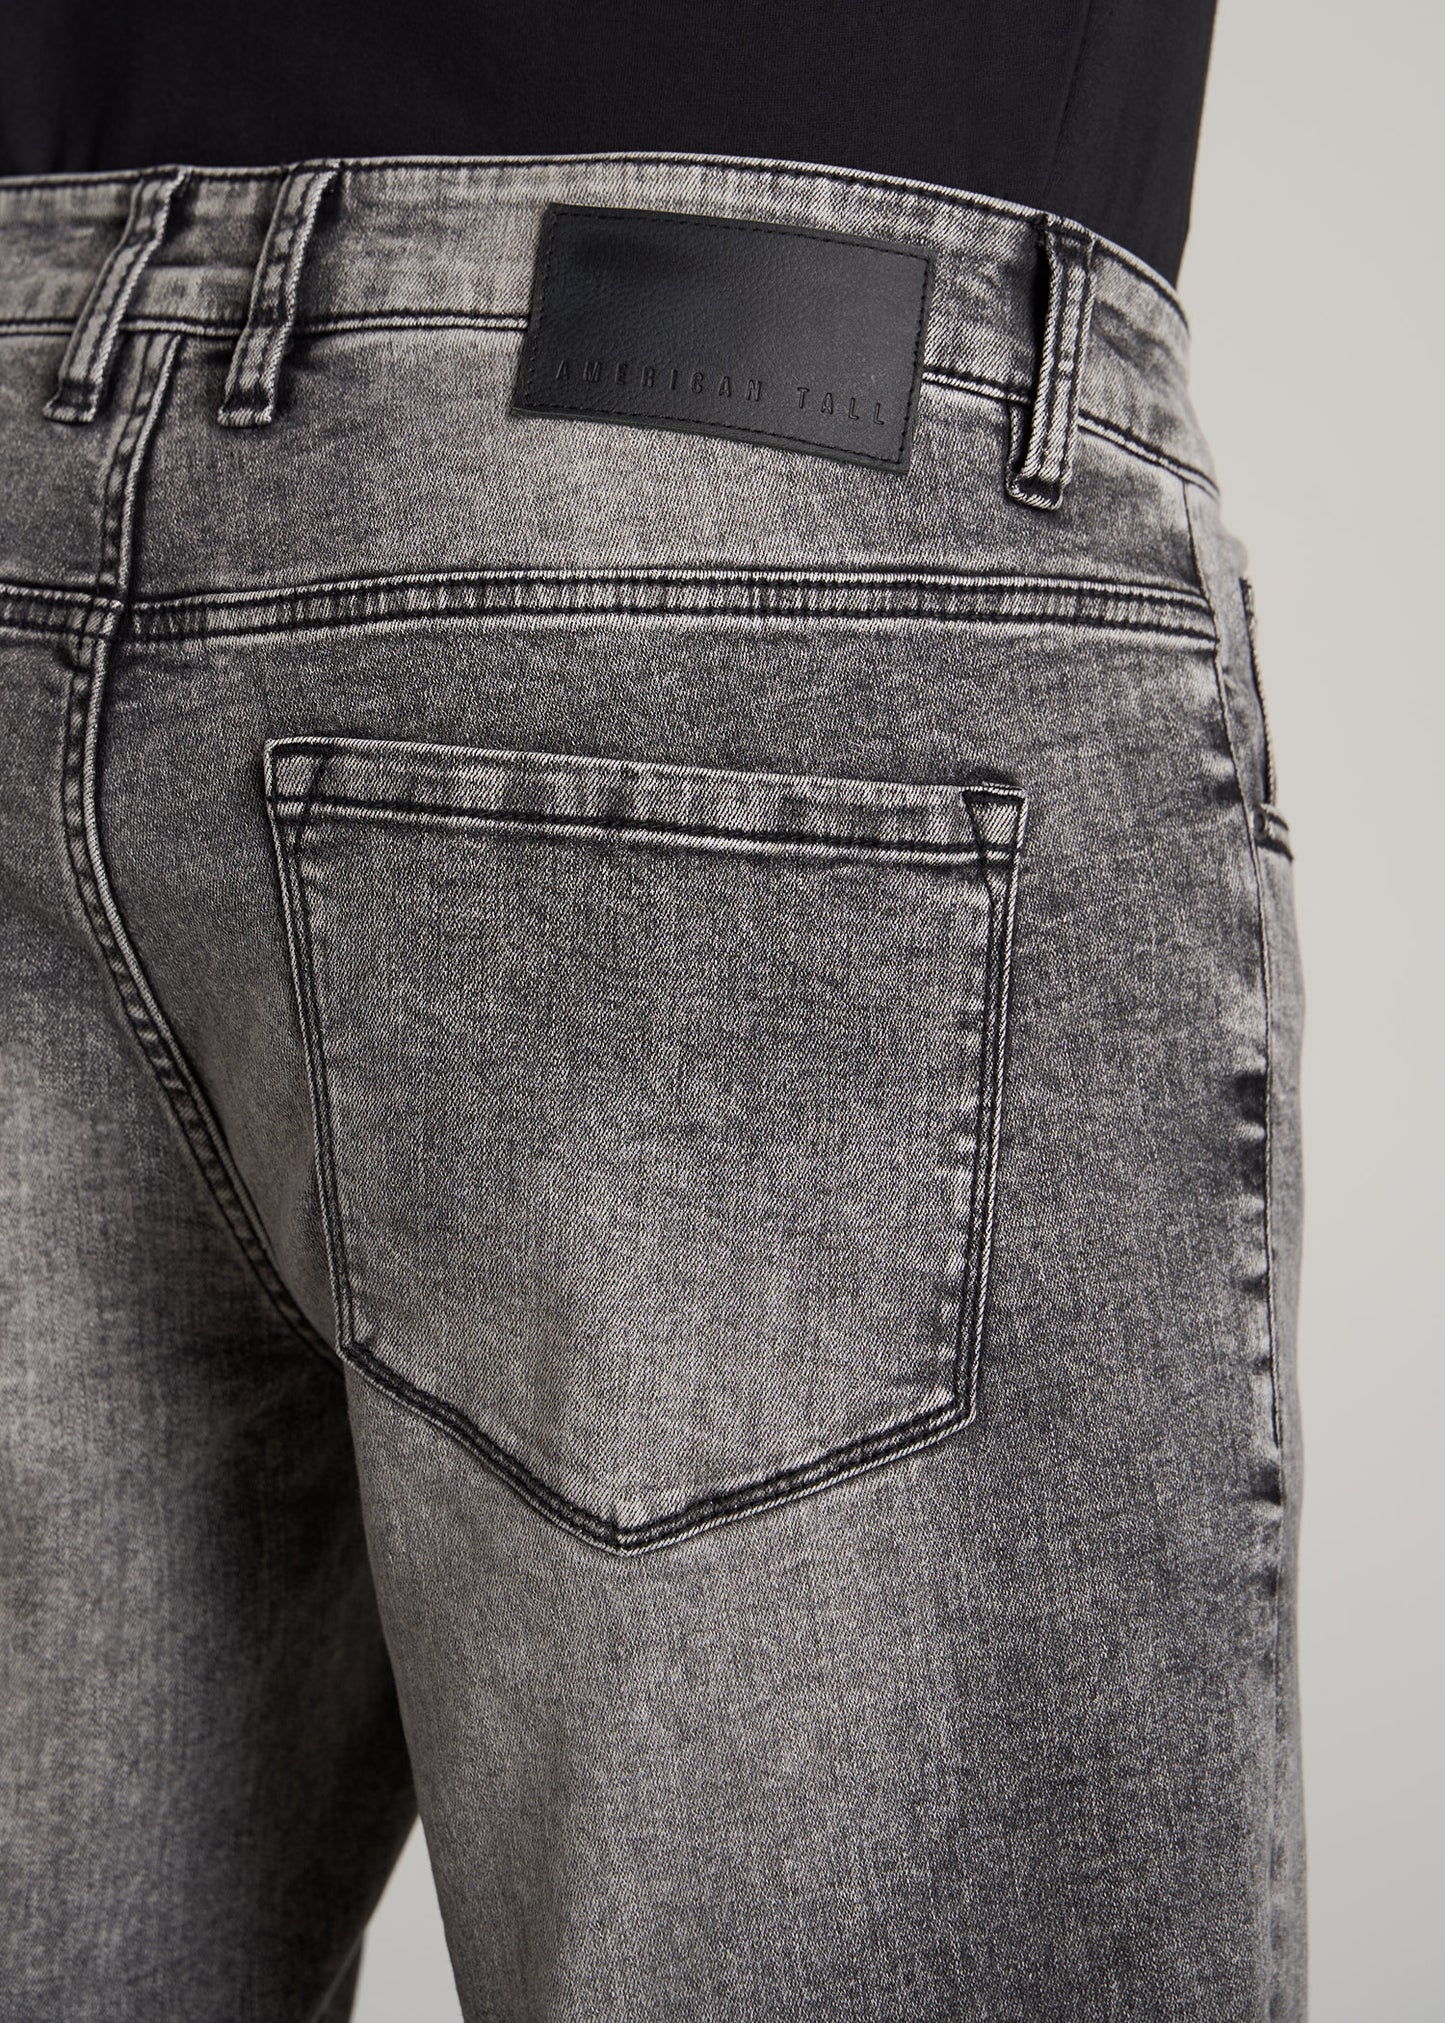 Carman TAPERED Jeans for Tall Men in California Blue